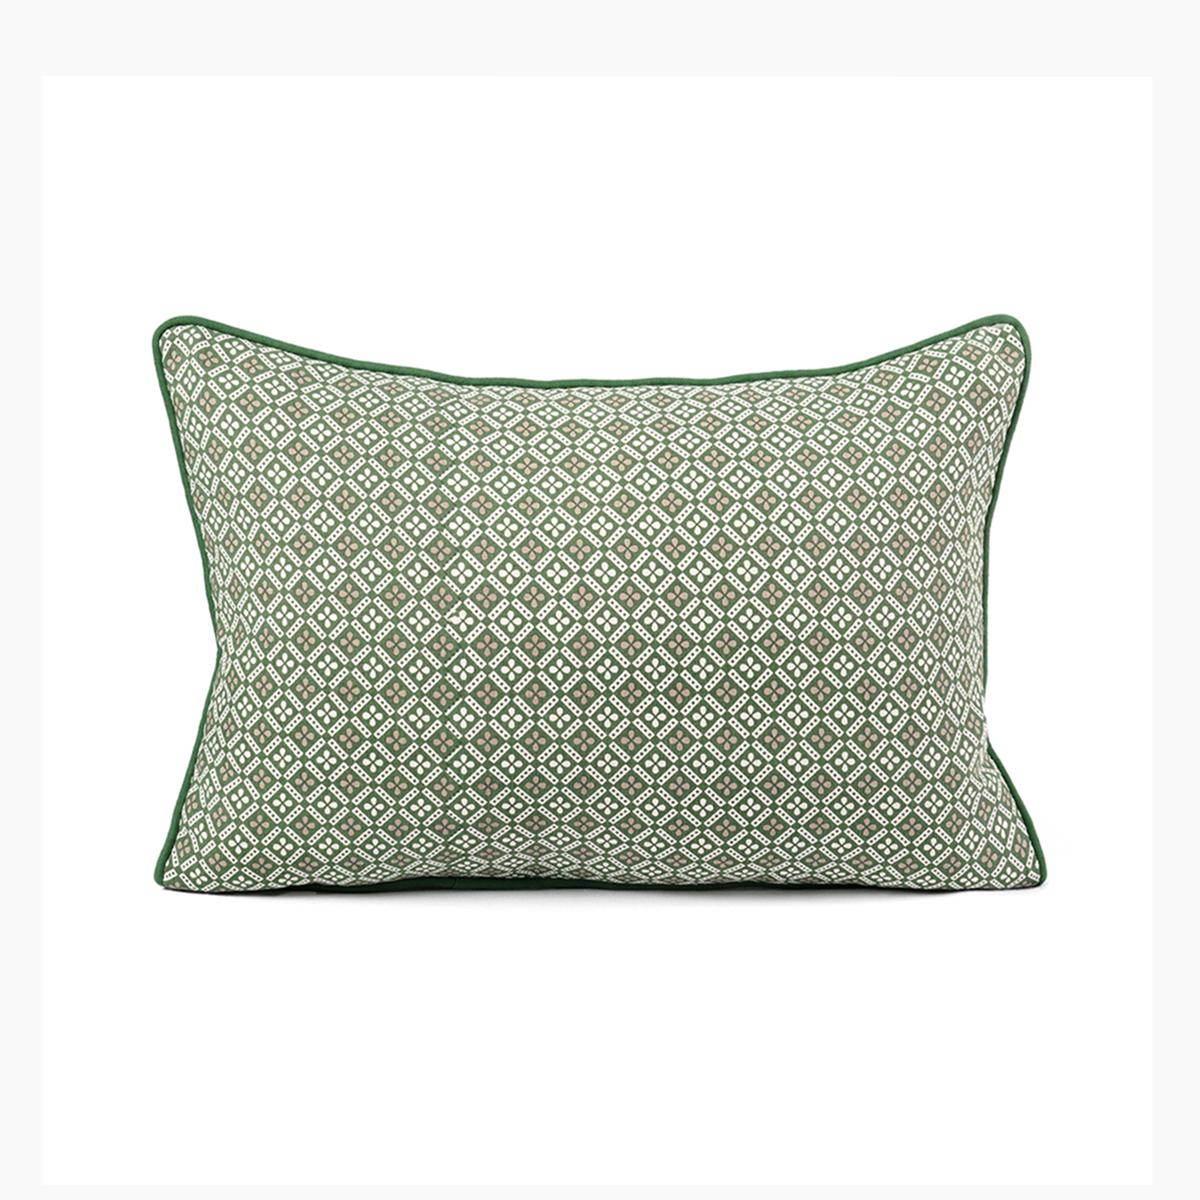 Green DOMINOTERIE geometric print cotton pillow cover, sizes available